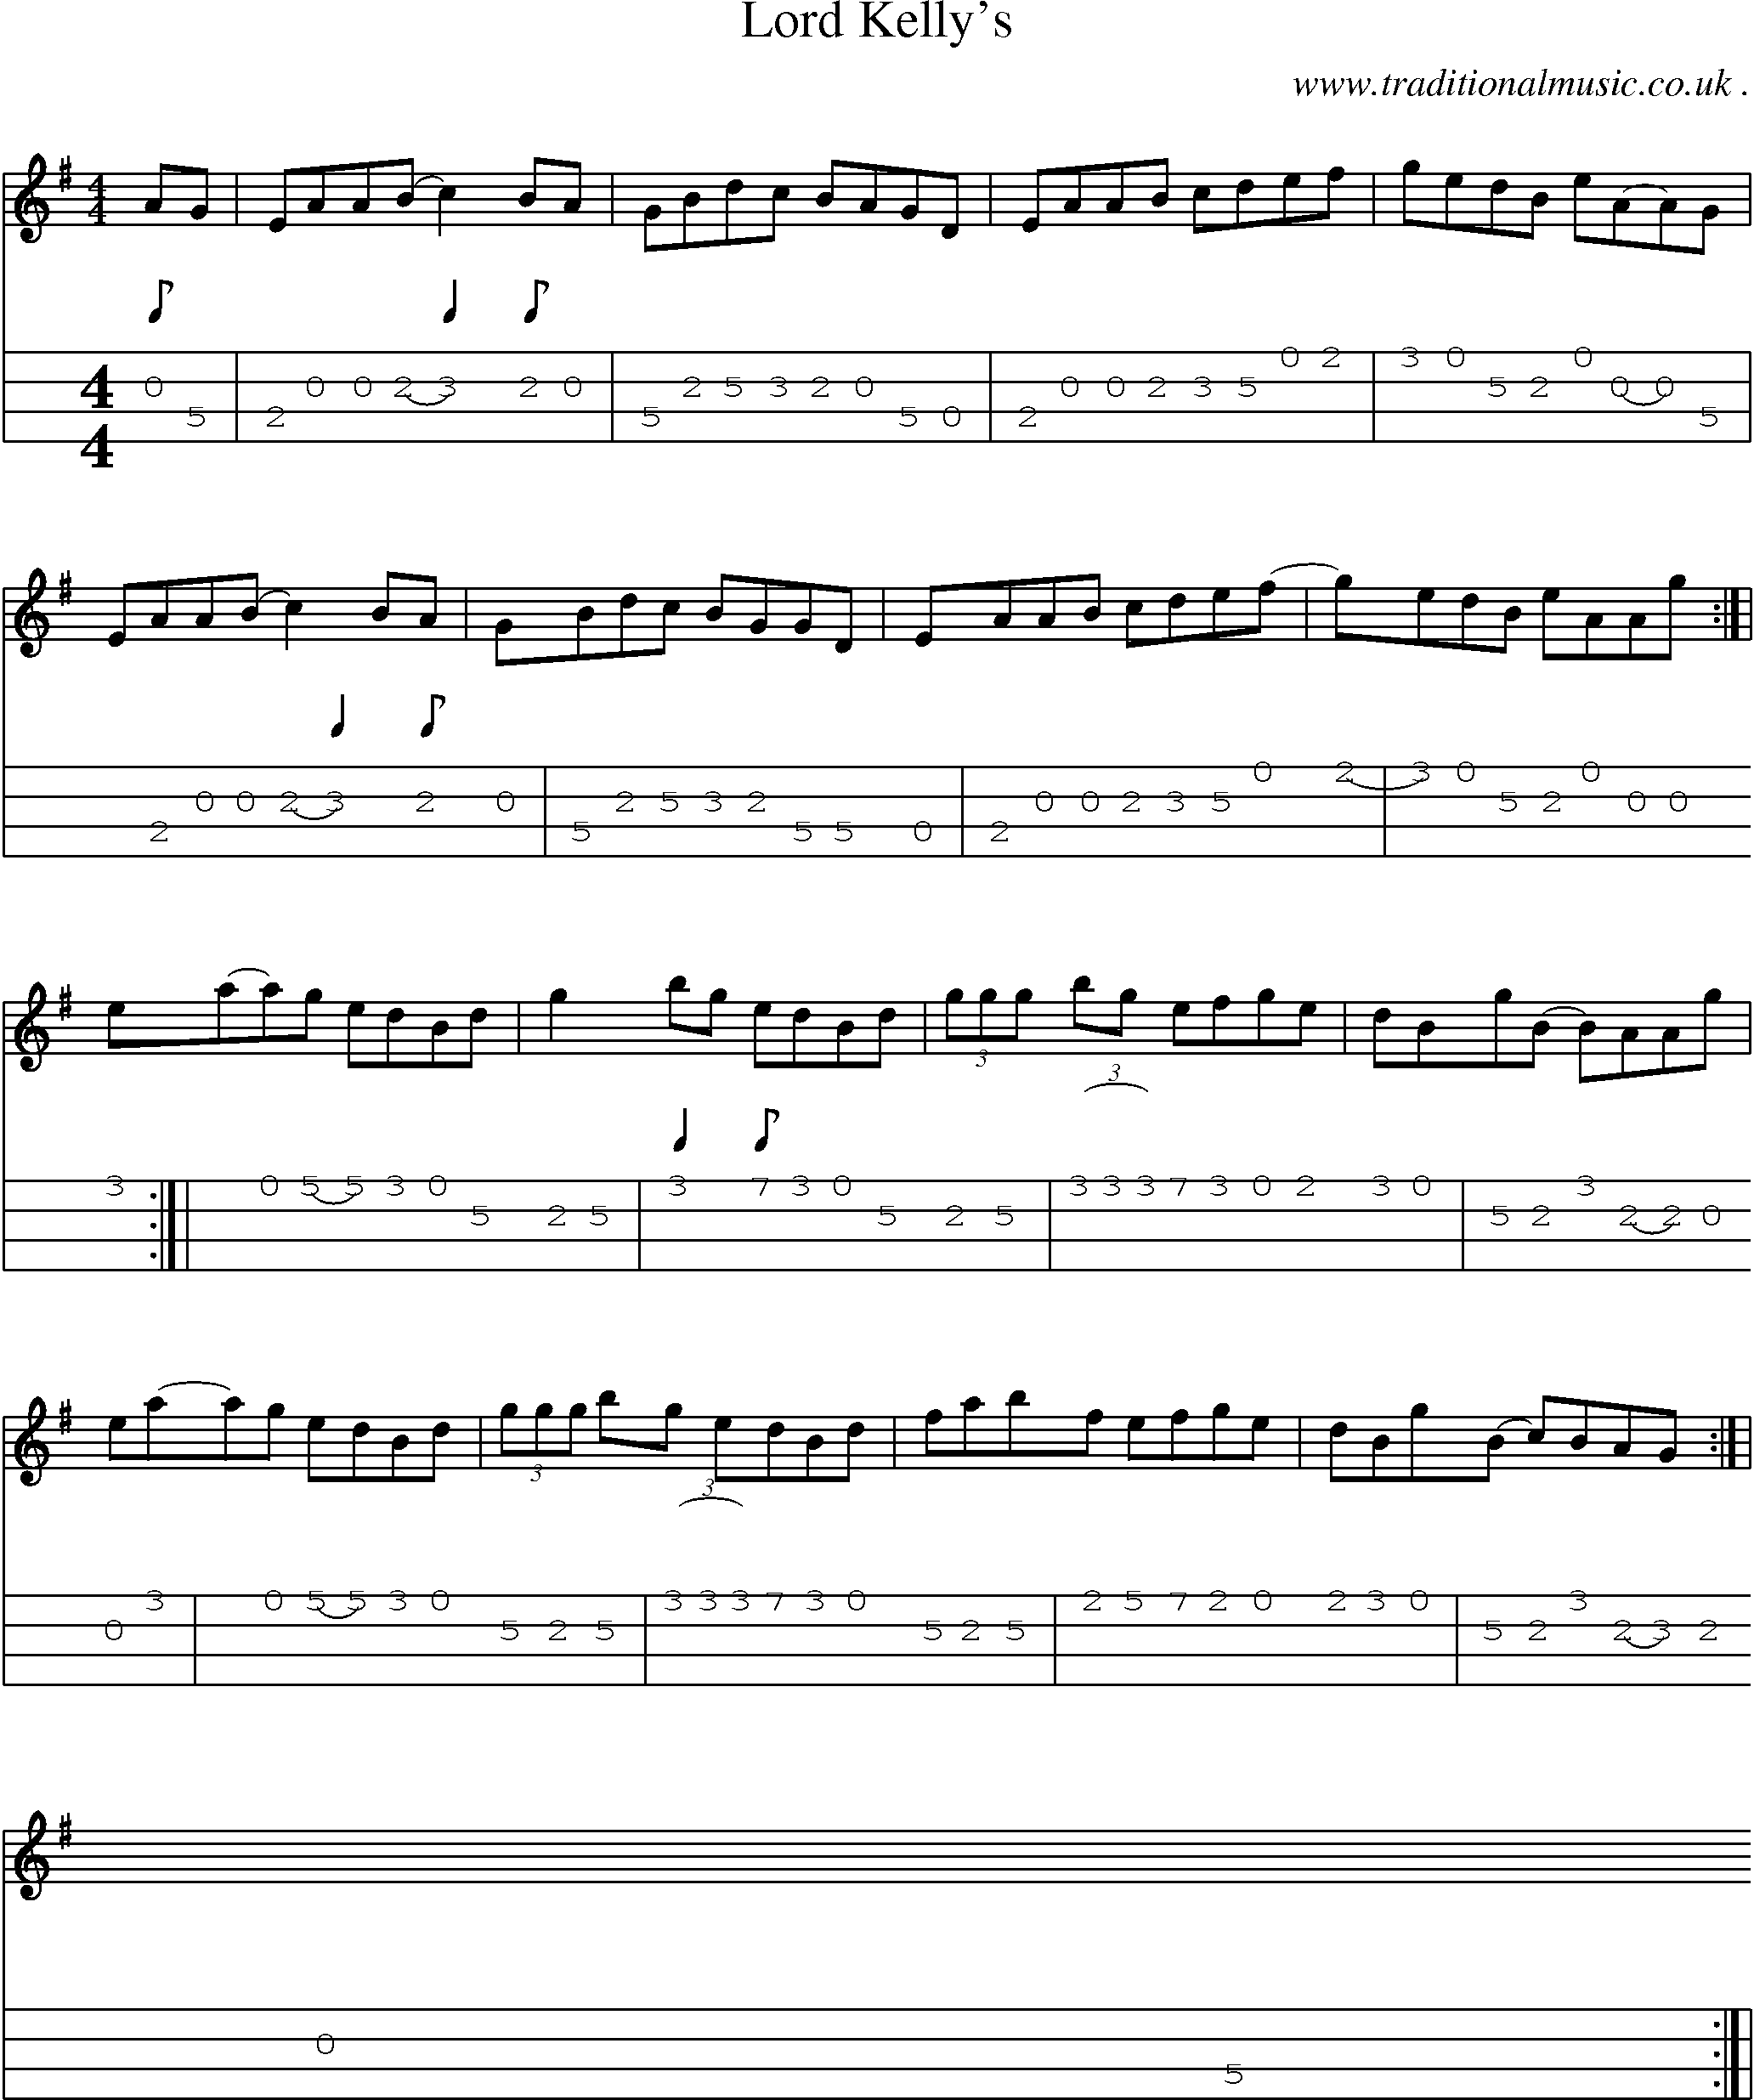 Sheet-music  score, Chords and Mandolin Tabs for Lord Kellys